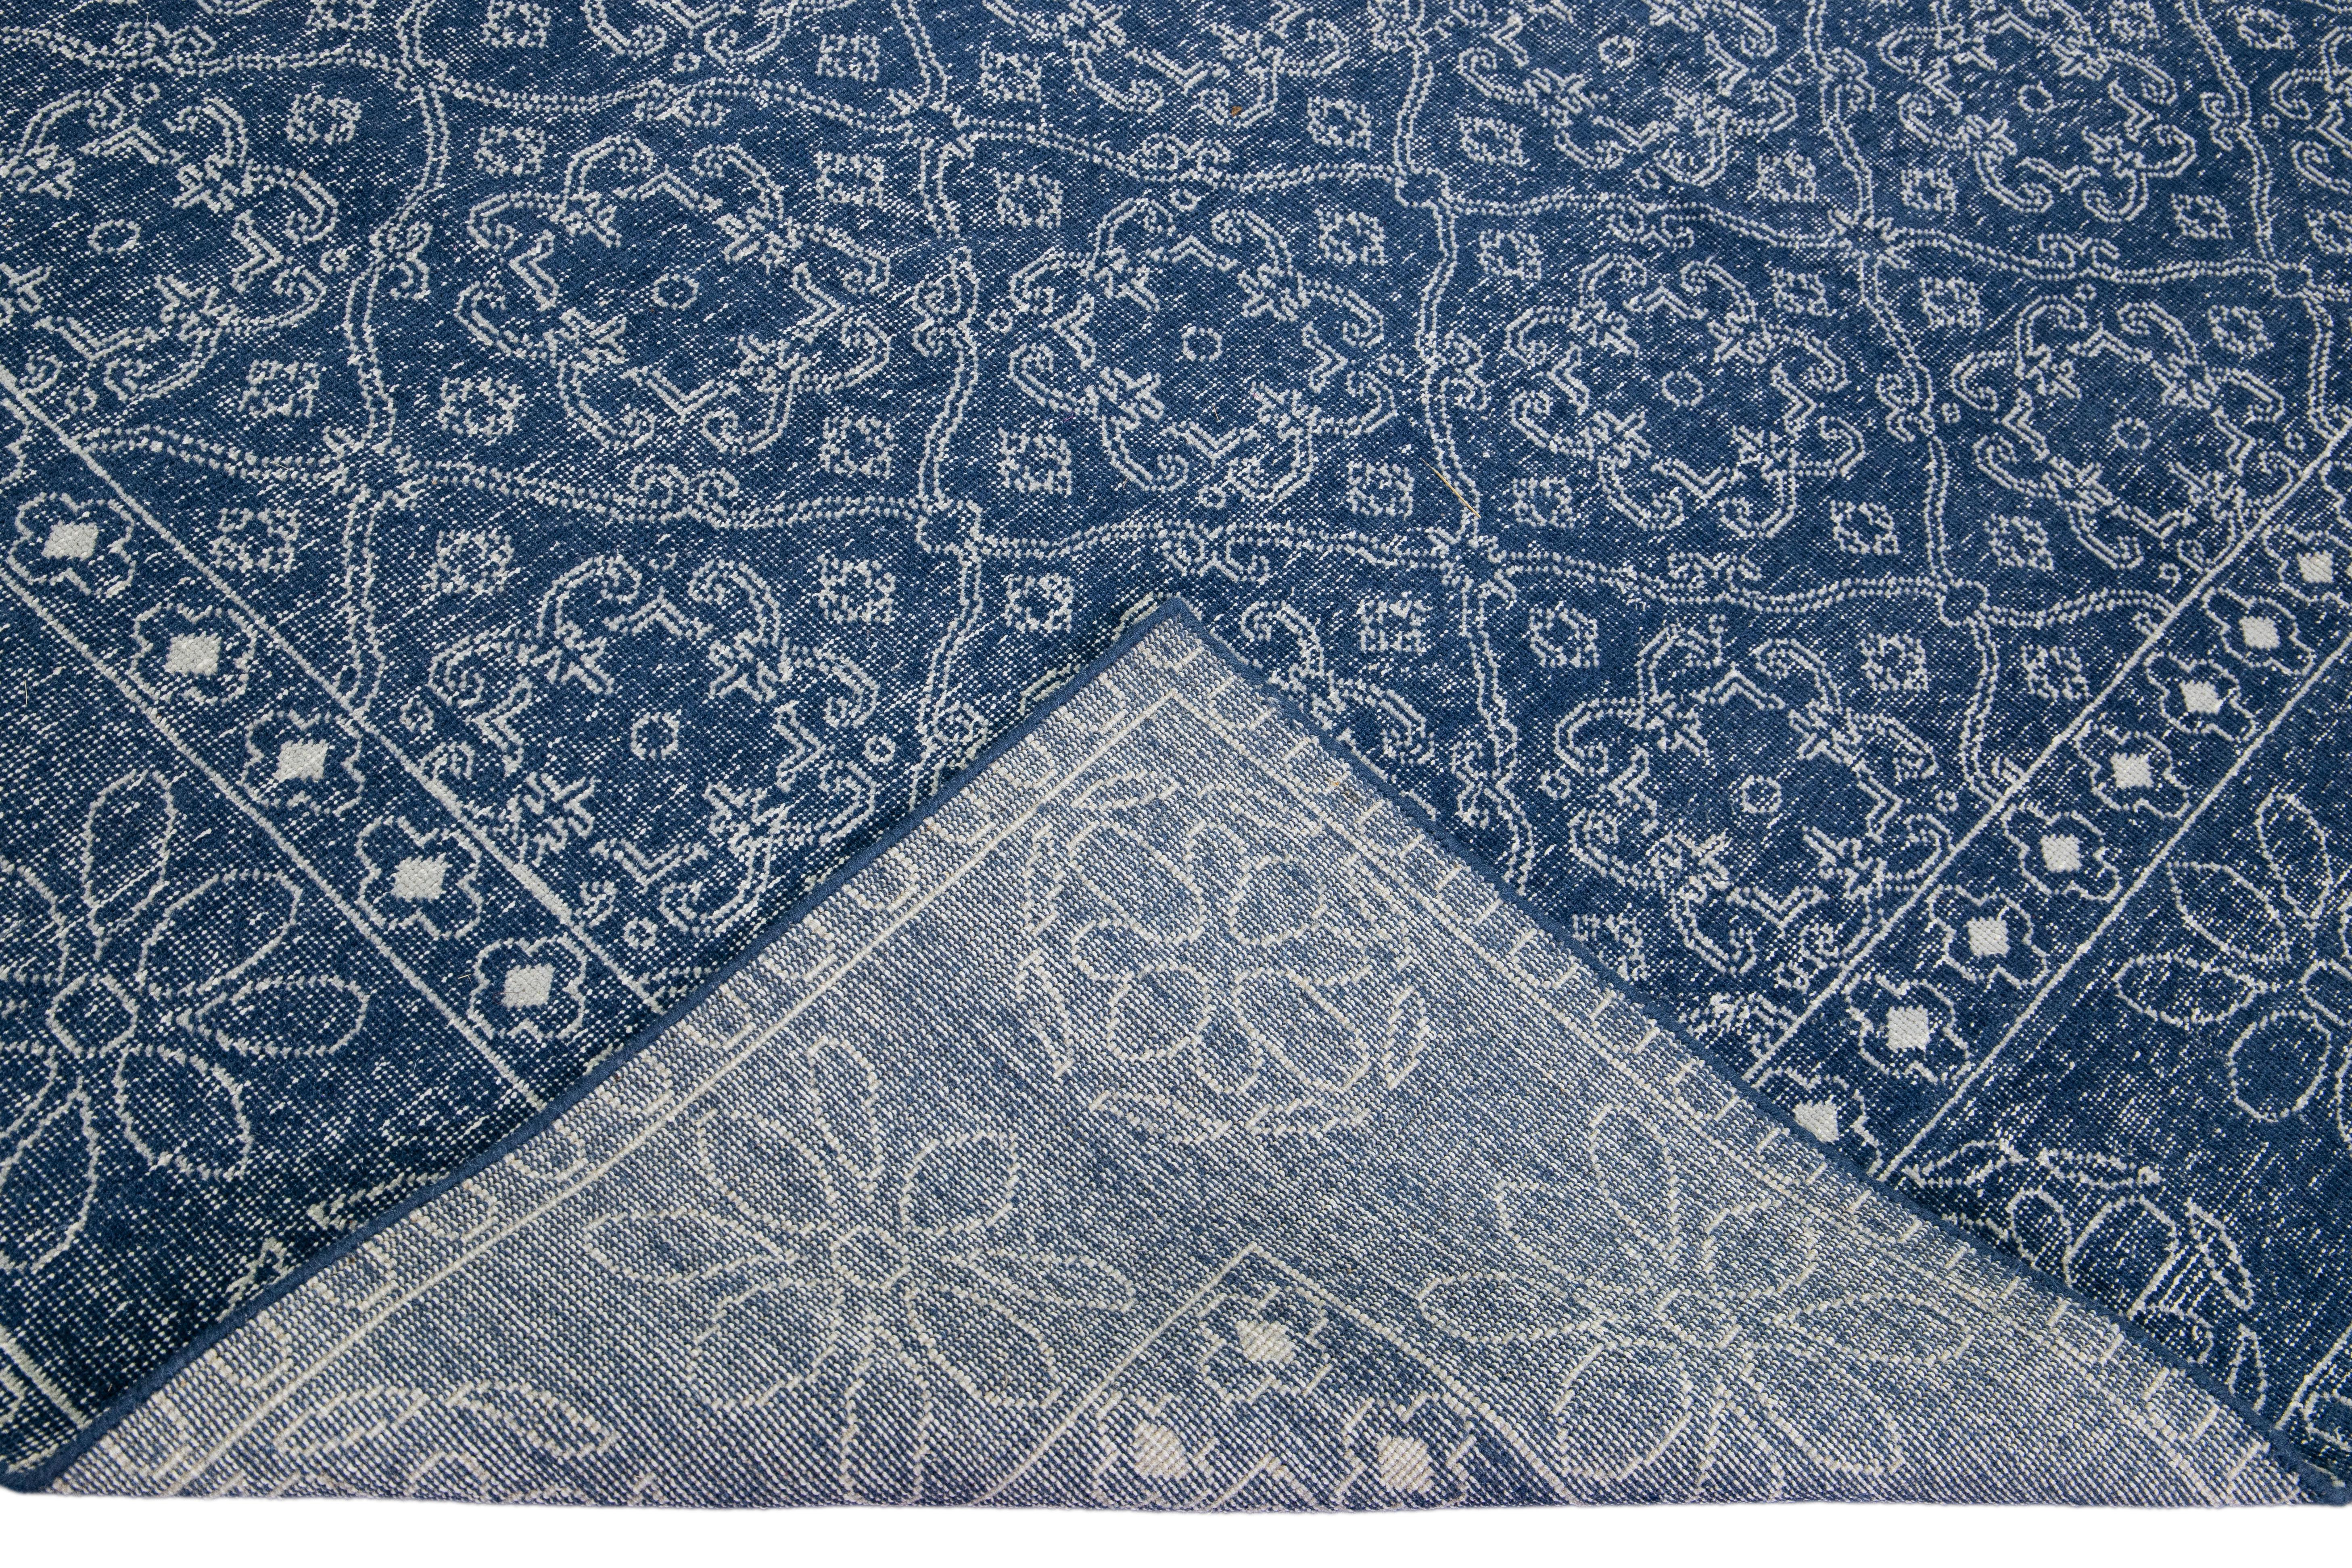 Beautiful Turkish handmade wool rug with a blue distress look field. This Modern rug has white accents featuring a gorgeous all-over floral trellis design.

This rug measures: 9' x 12'1